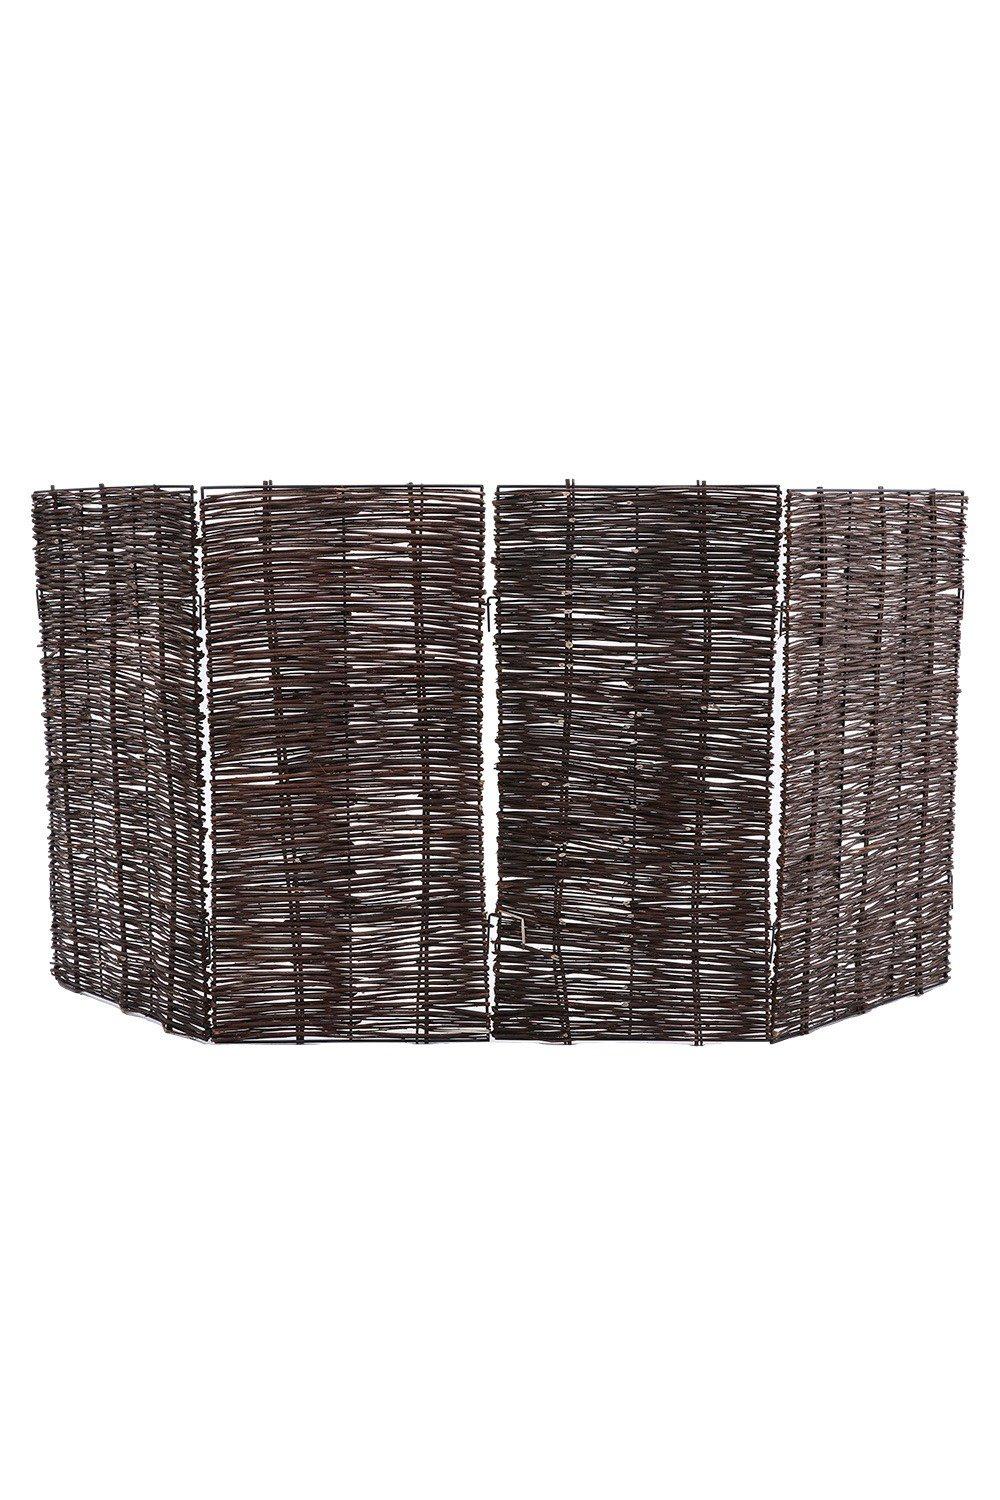 Trash Can Fence Wicker Privacy Fence